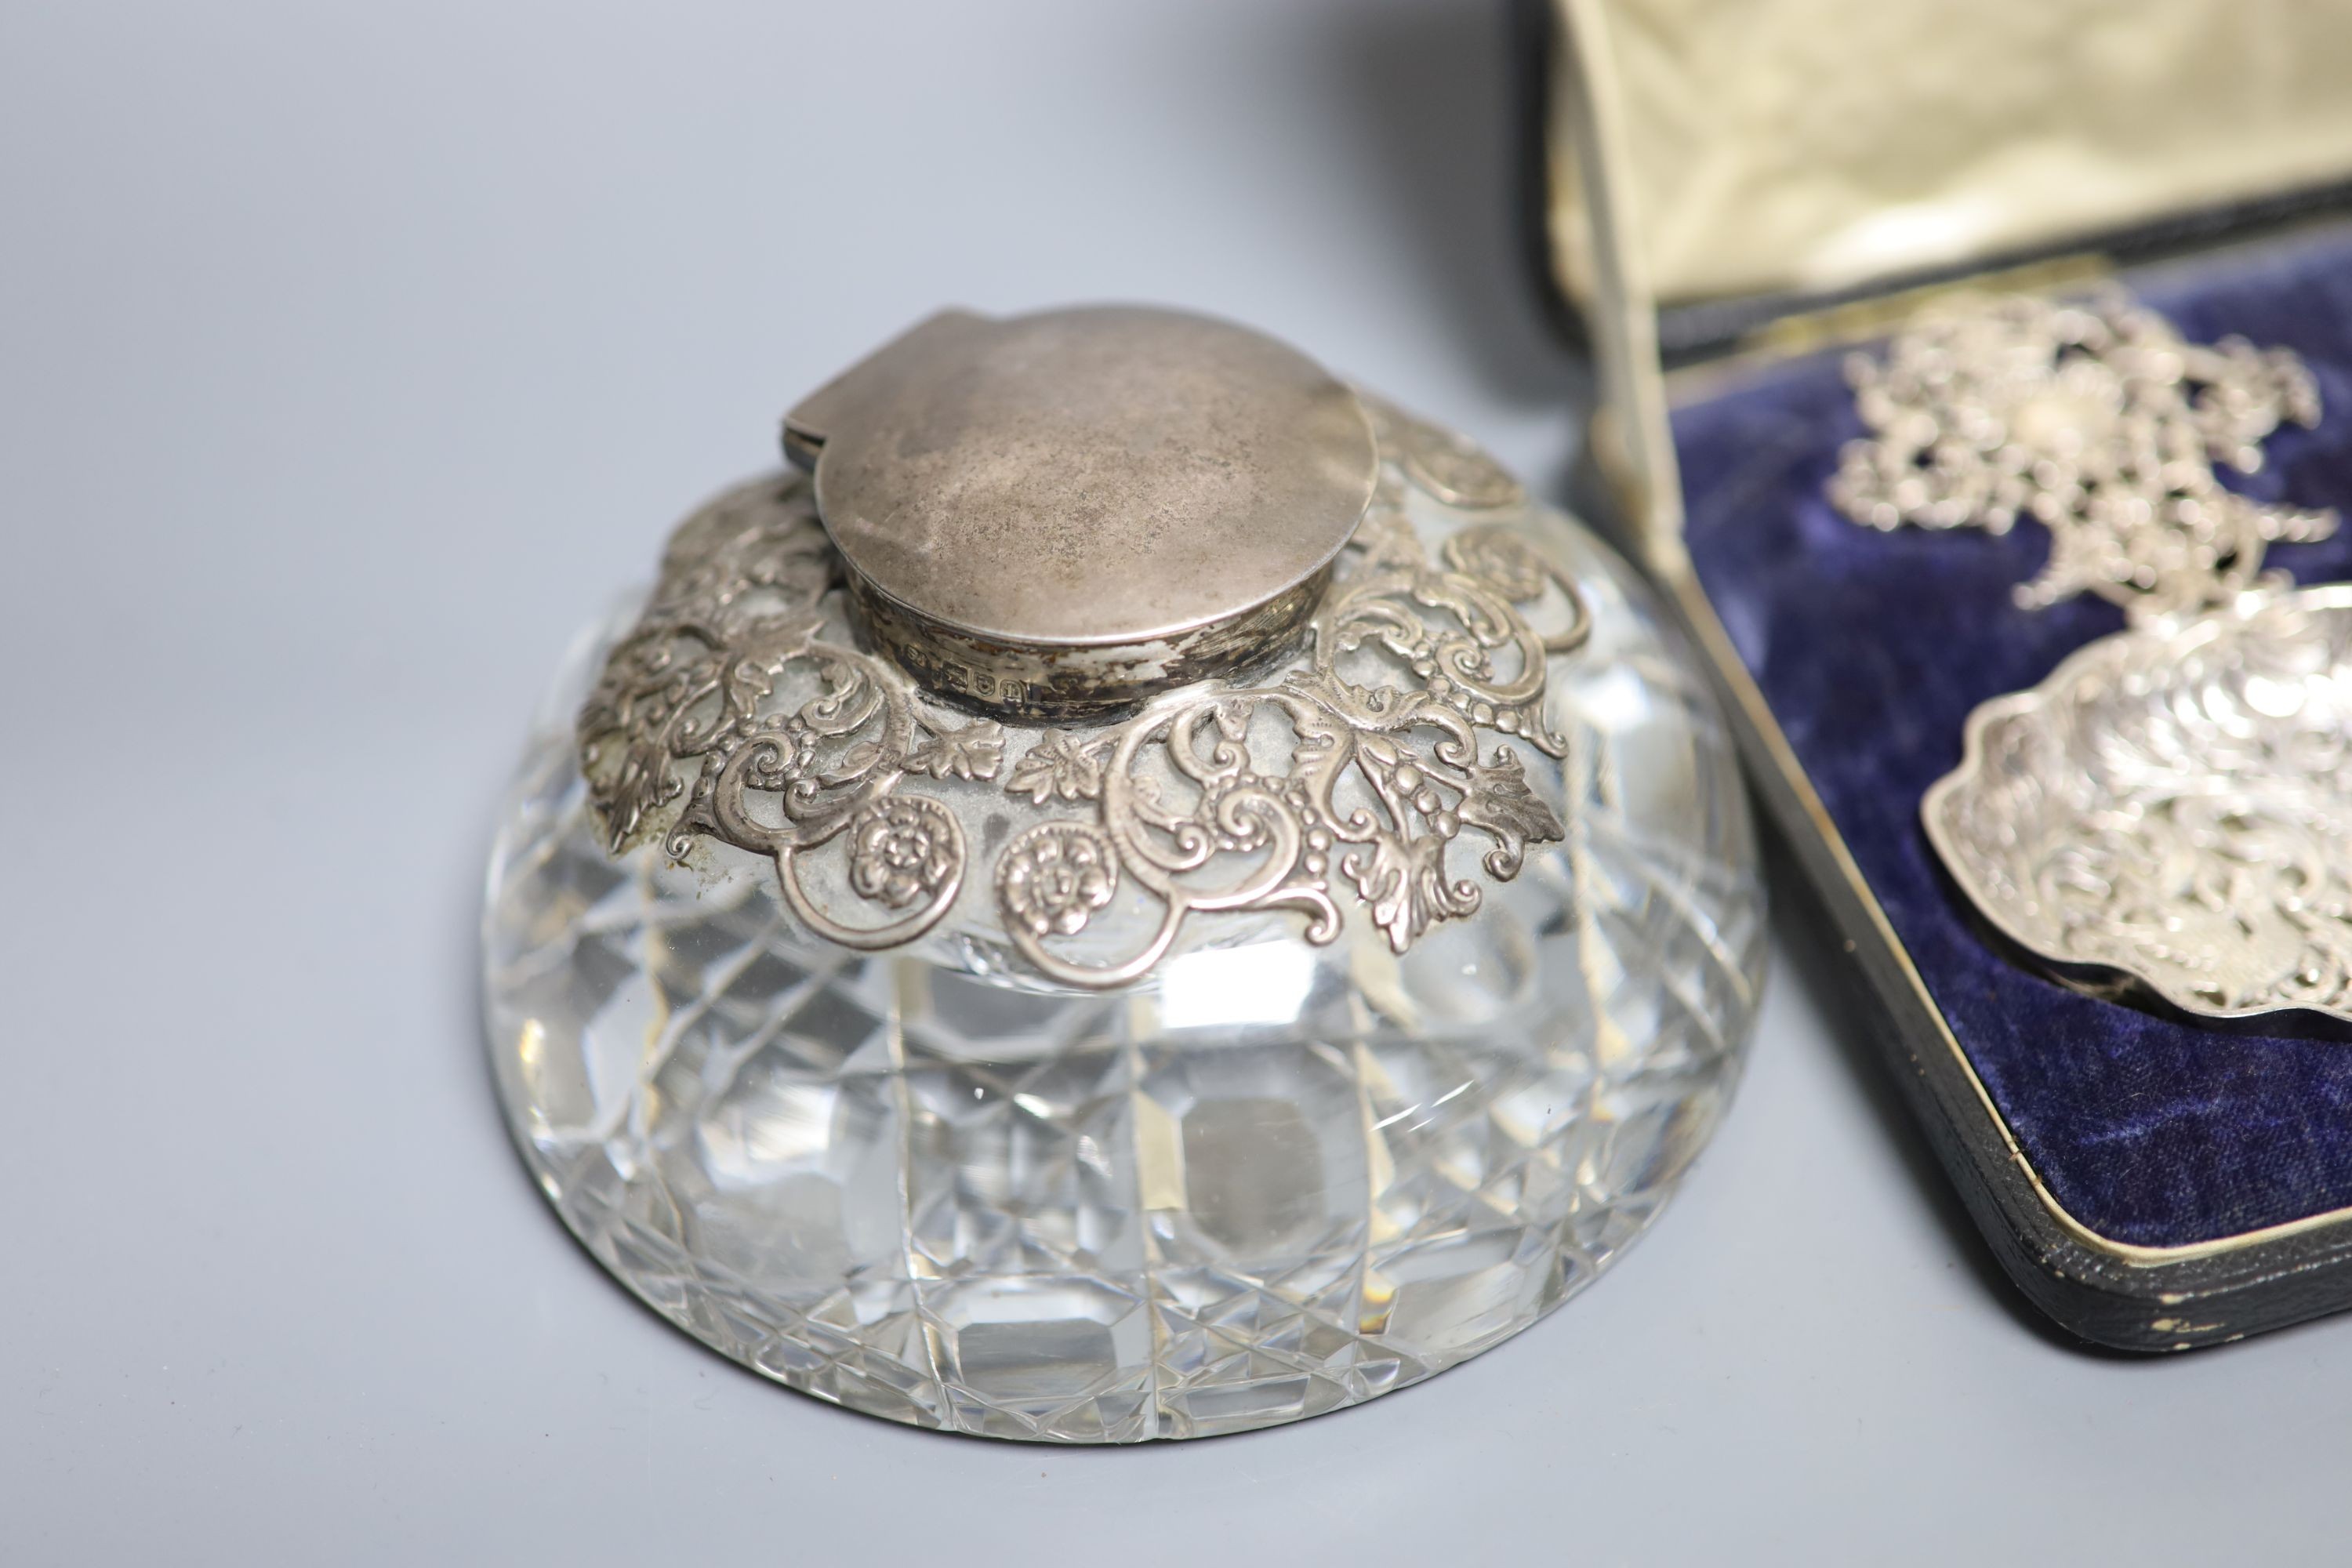 A glass silver mounted inkwell, 2 napkin rings boxed silver dishes and an enamel box - Image 4 of 6